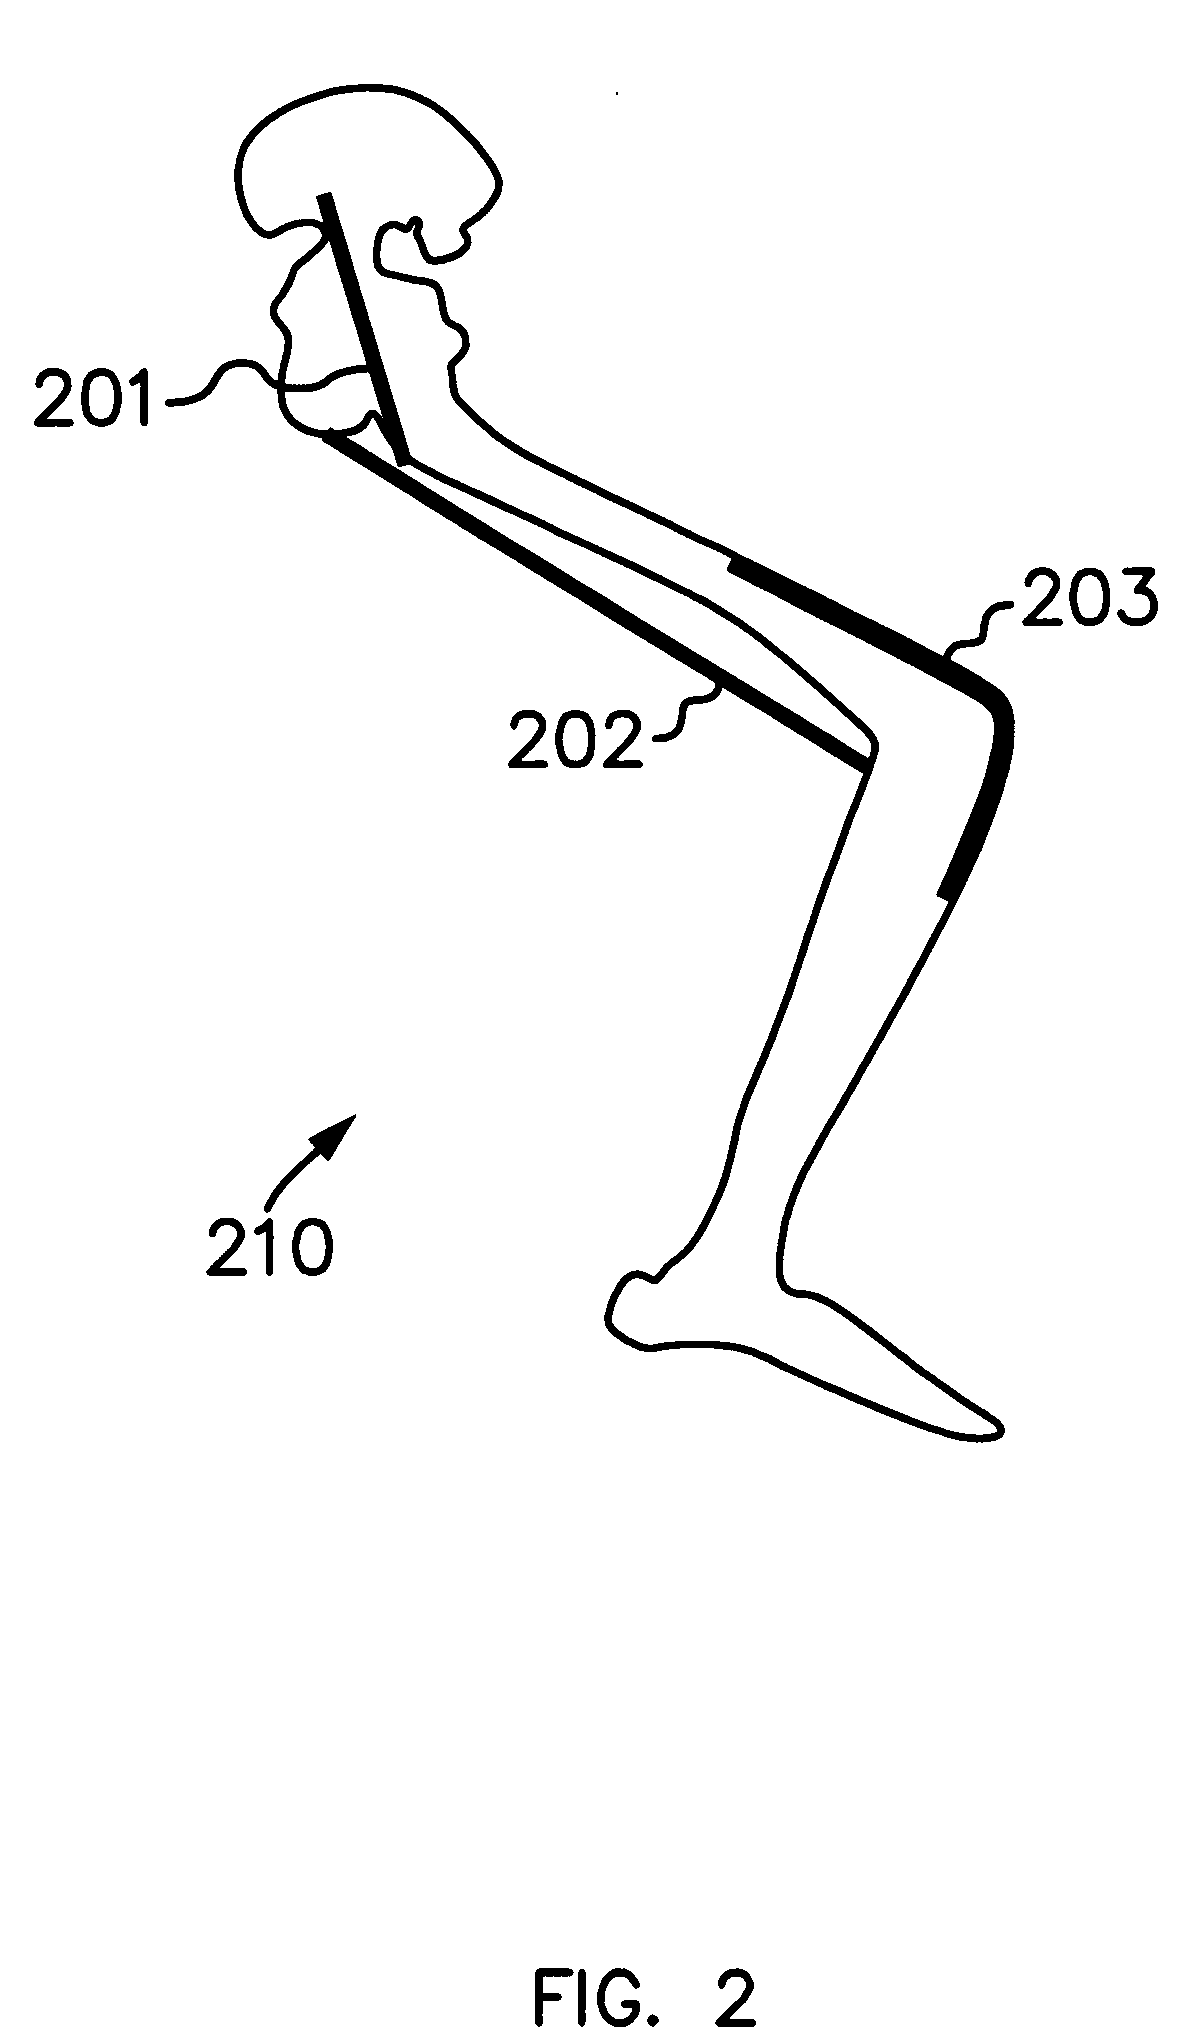 System for functional electrical stimulation